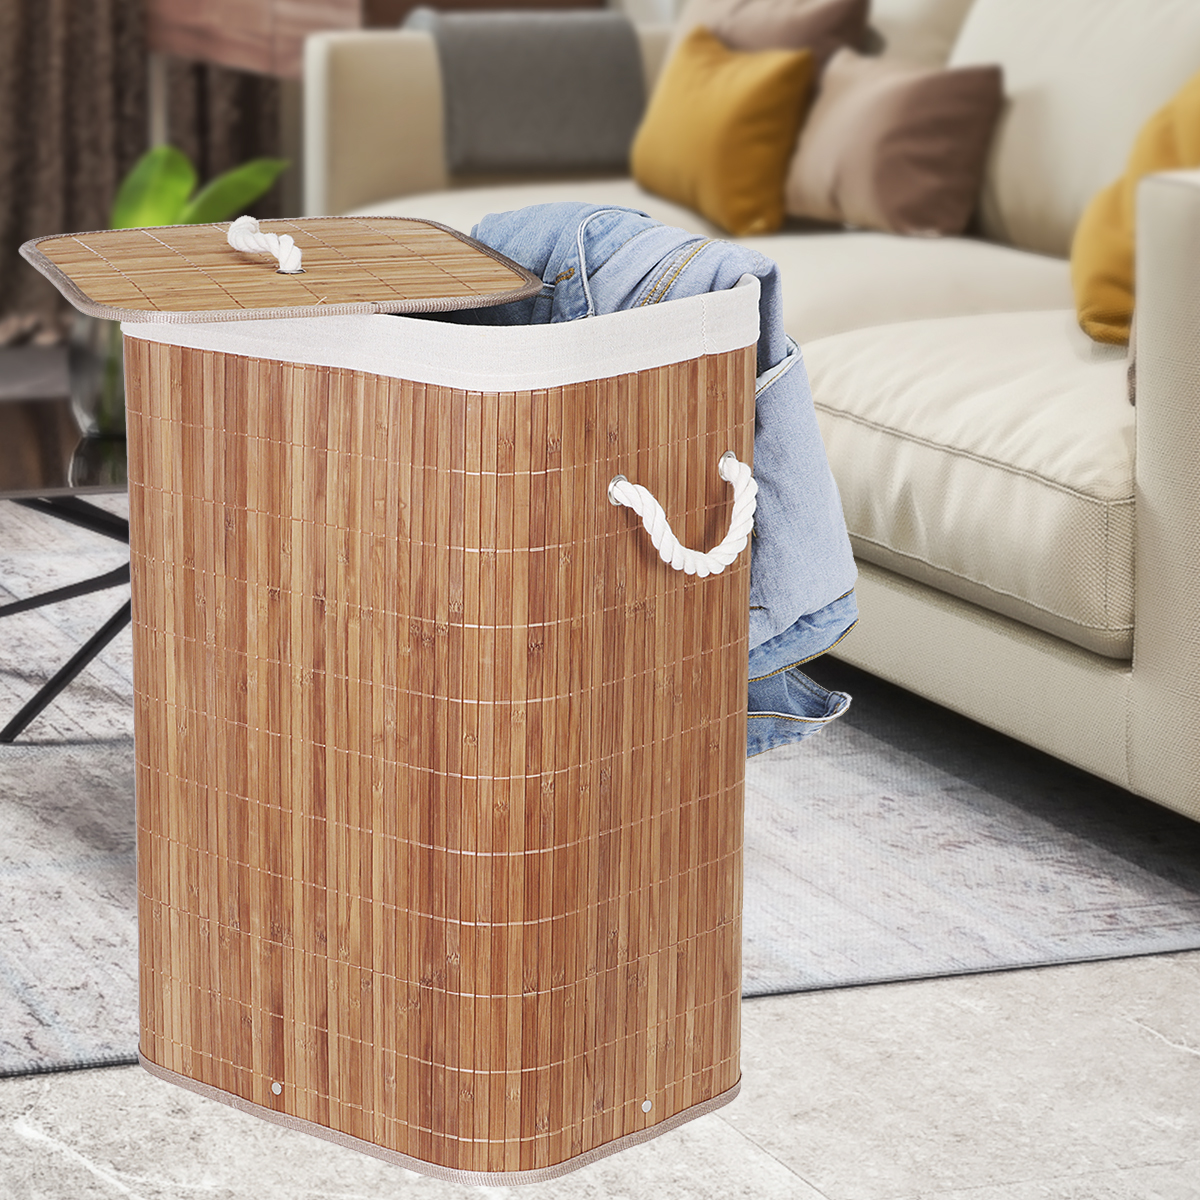 Folding-Bamboo-Laundry-Basket-with-Lid-Removable-Bag-Dirty-Clothes-Storage-1854896-19